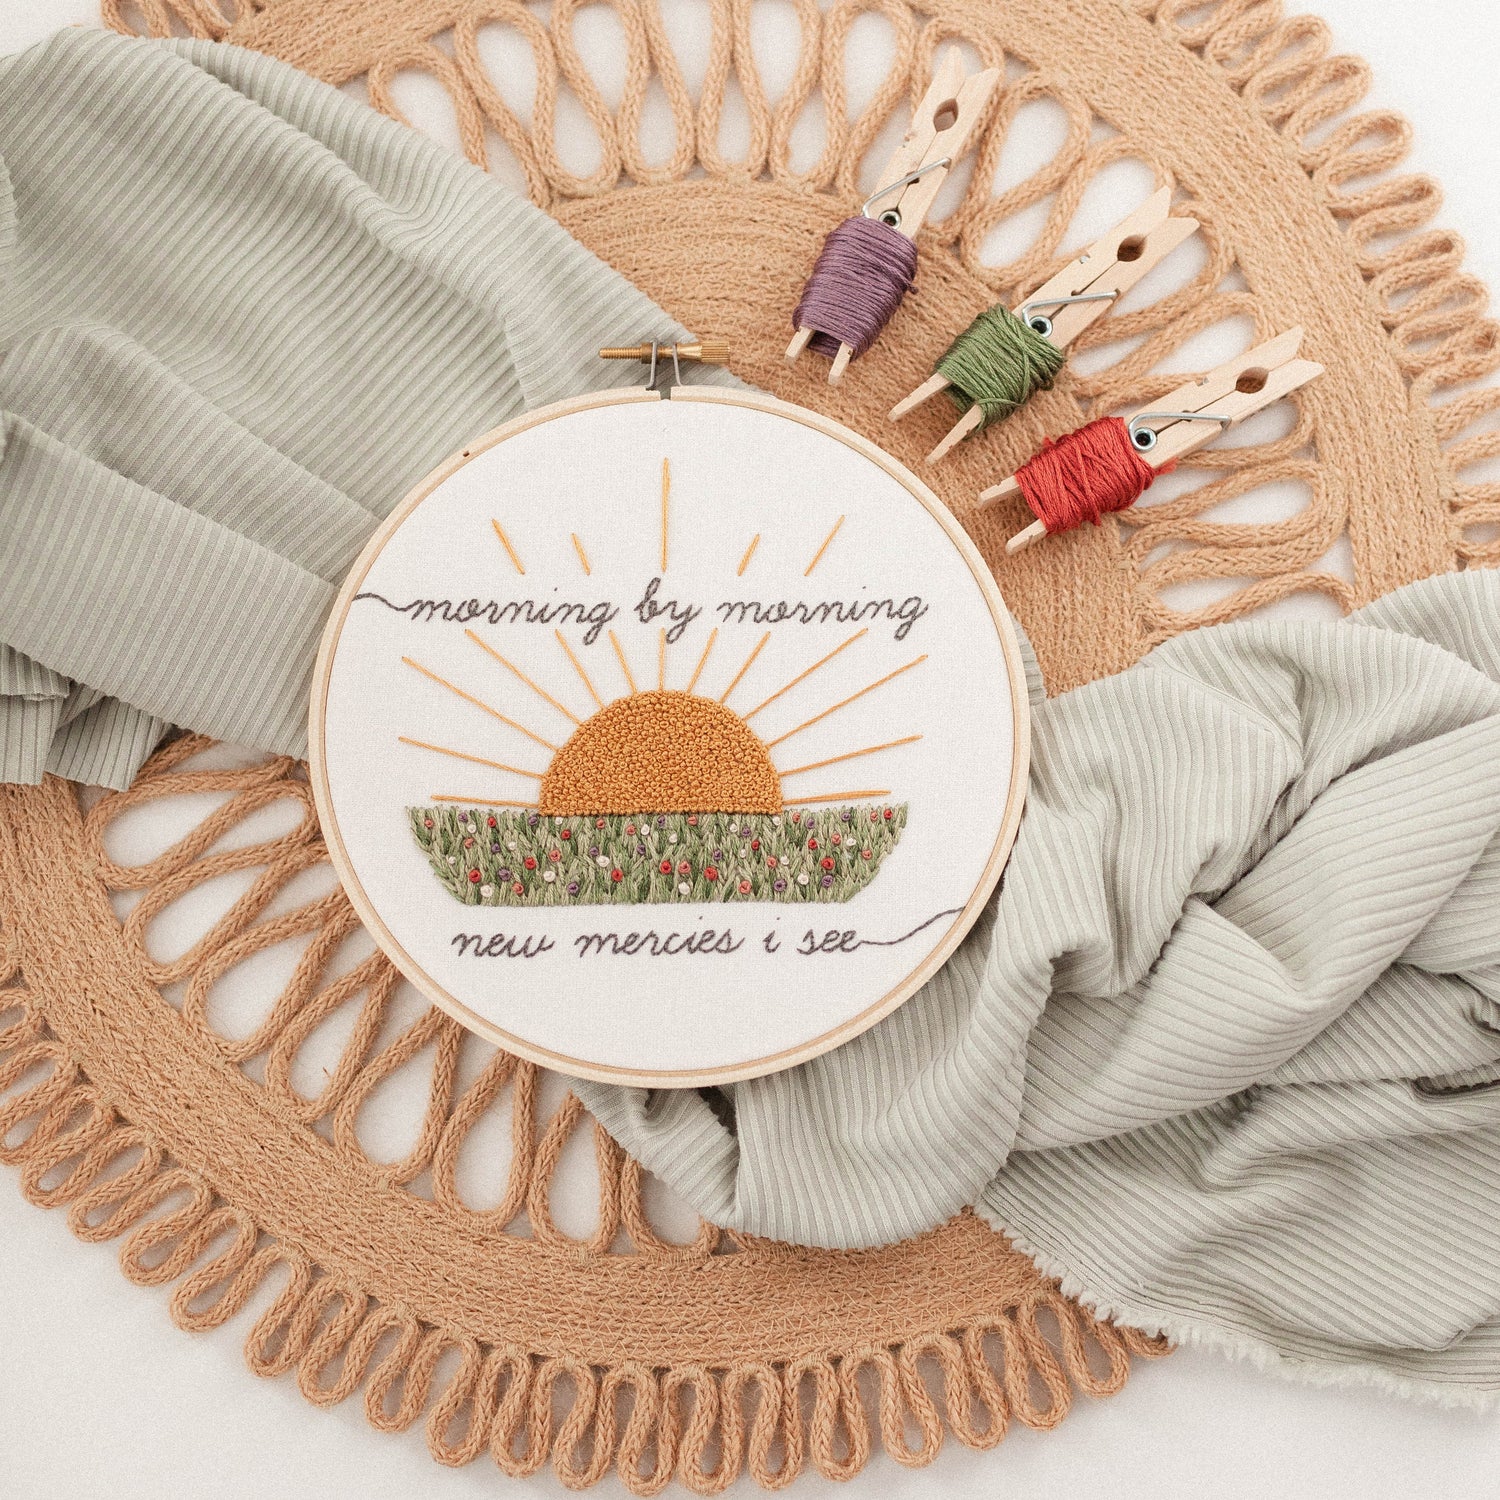 Great is Thy Faithfulness, Lamentations 3:22-23, Embroidery Kit for Beginners - Abide Embroidery Co.